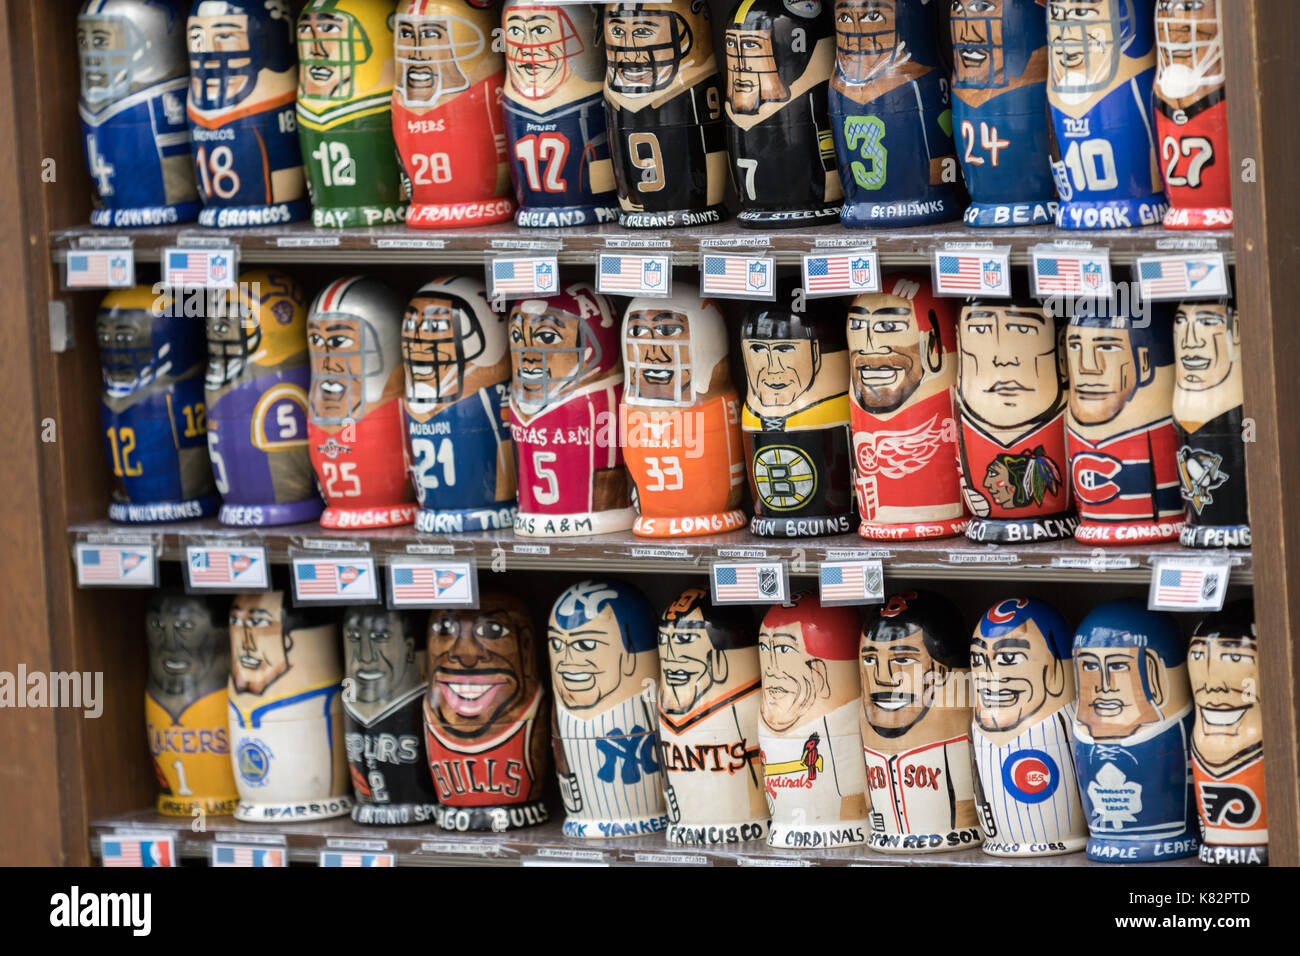 Prague, Czech Republic - August 21, 2017: matrioska depicting American rugby players are on sale at a store in the historic city center Stock Photo